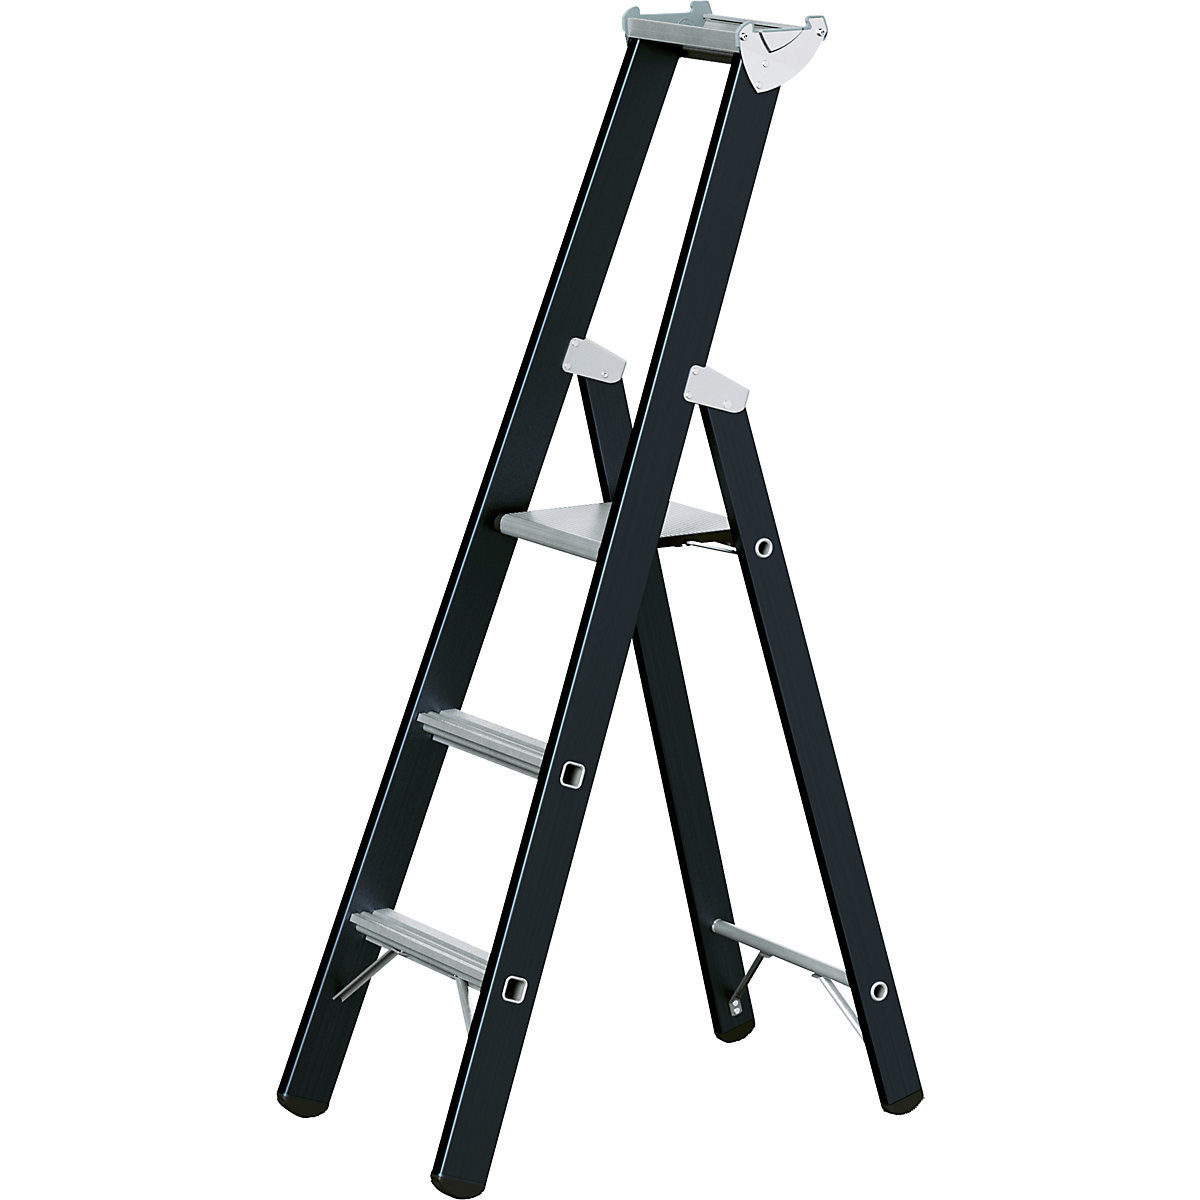 Heavy duty step ladder – ZARGES